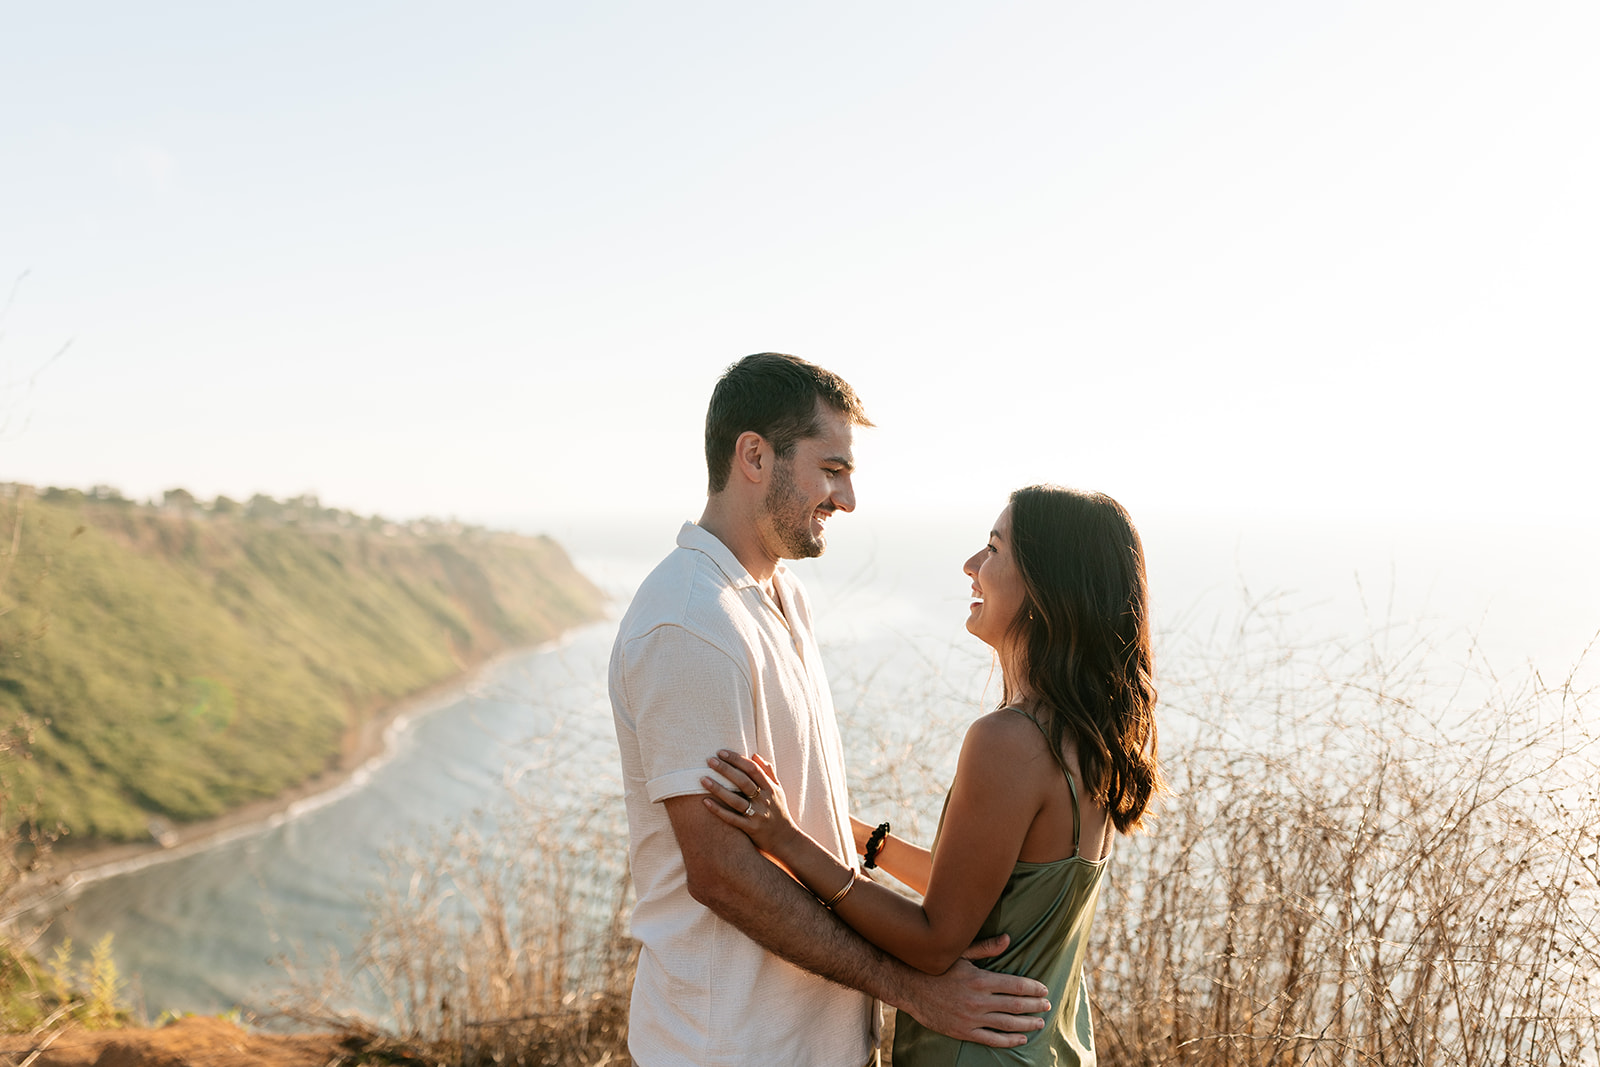 cliffside proposal engagement session palos verdes california socal couples photoshoot photo session couples outfits